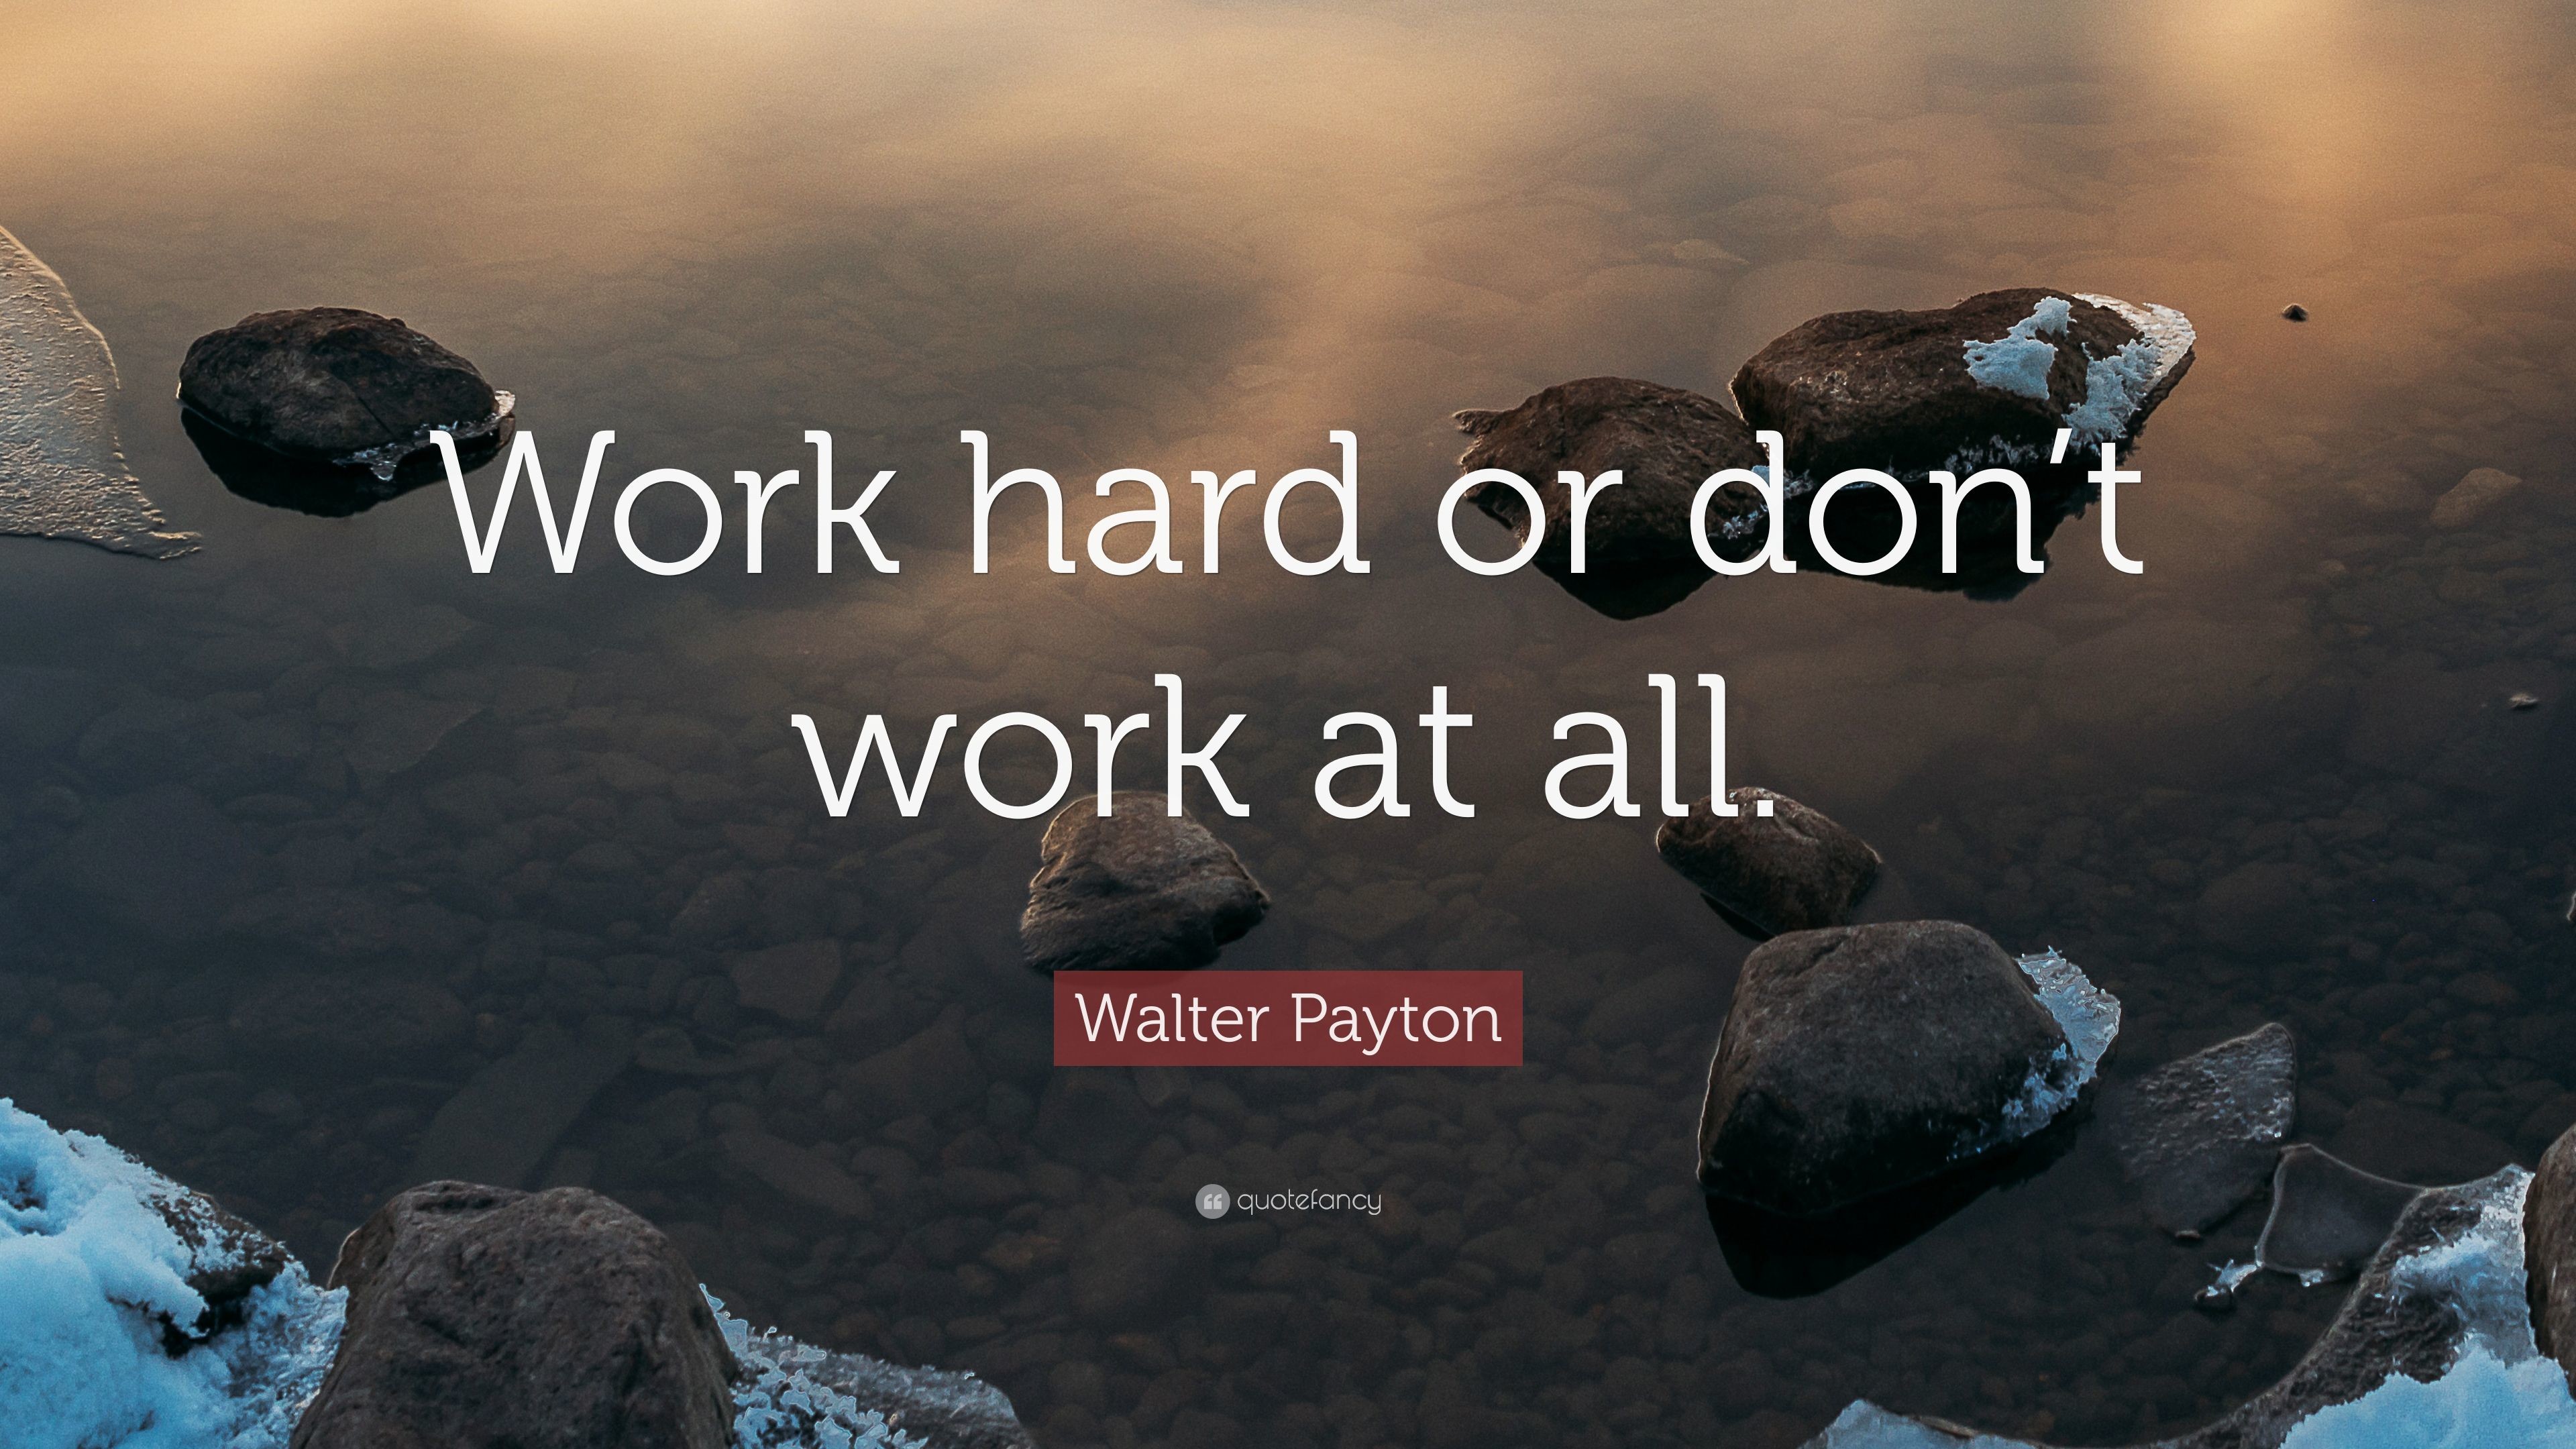 3840x2160 Walter Payton Quote: “Work hard or don't work at all.”